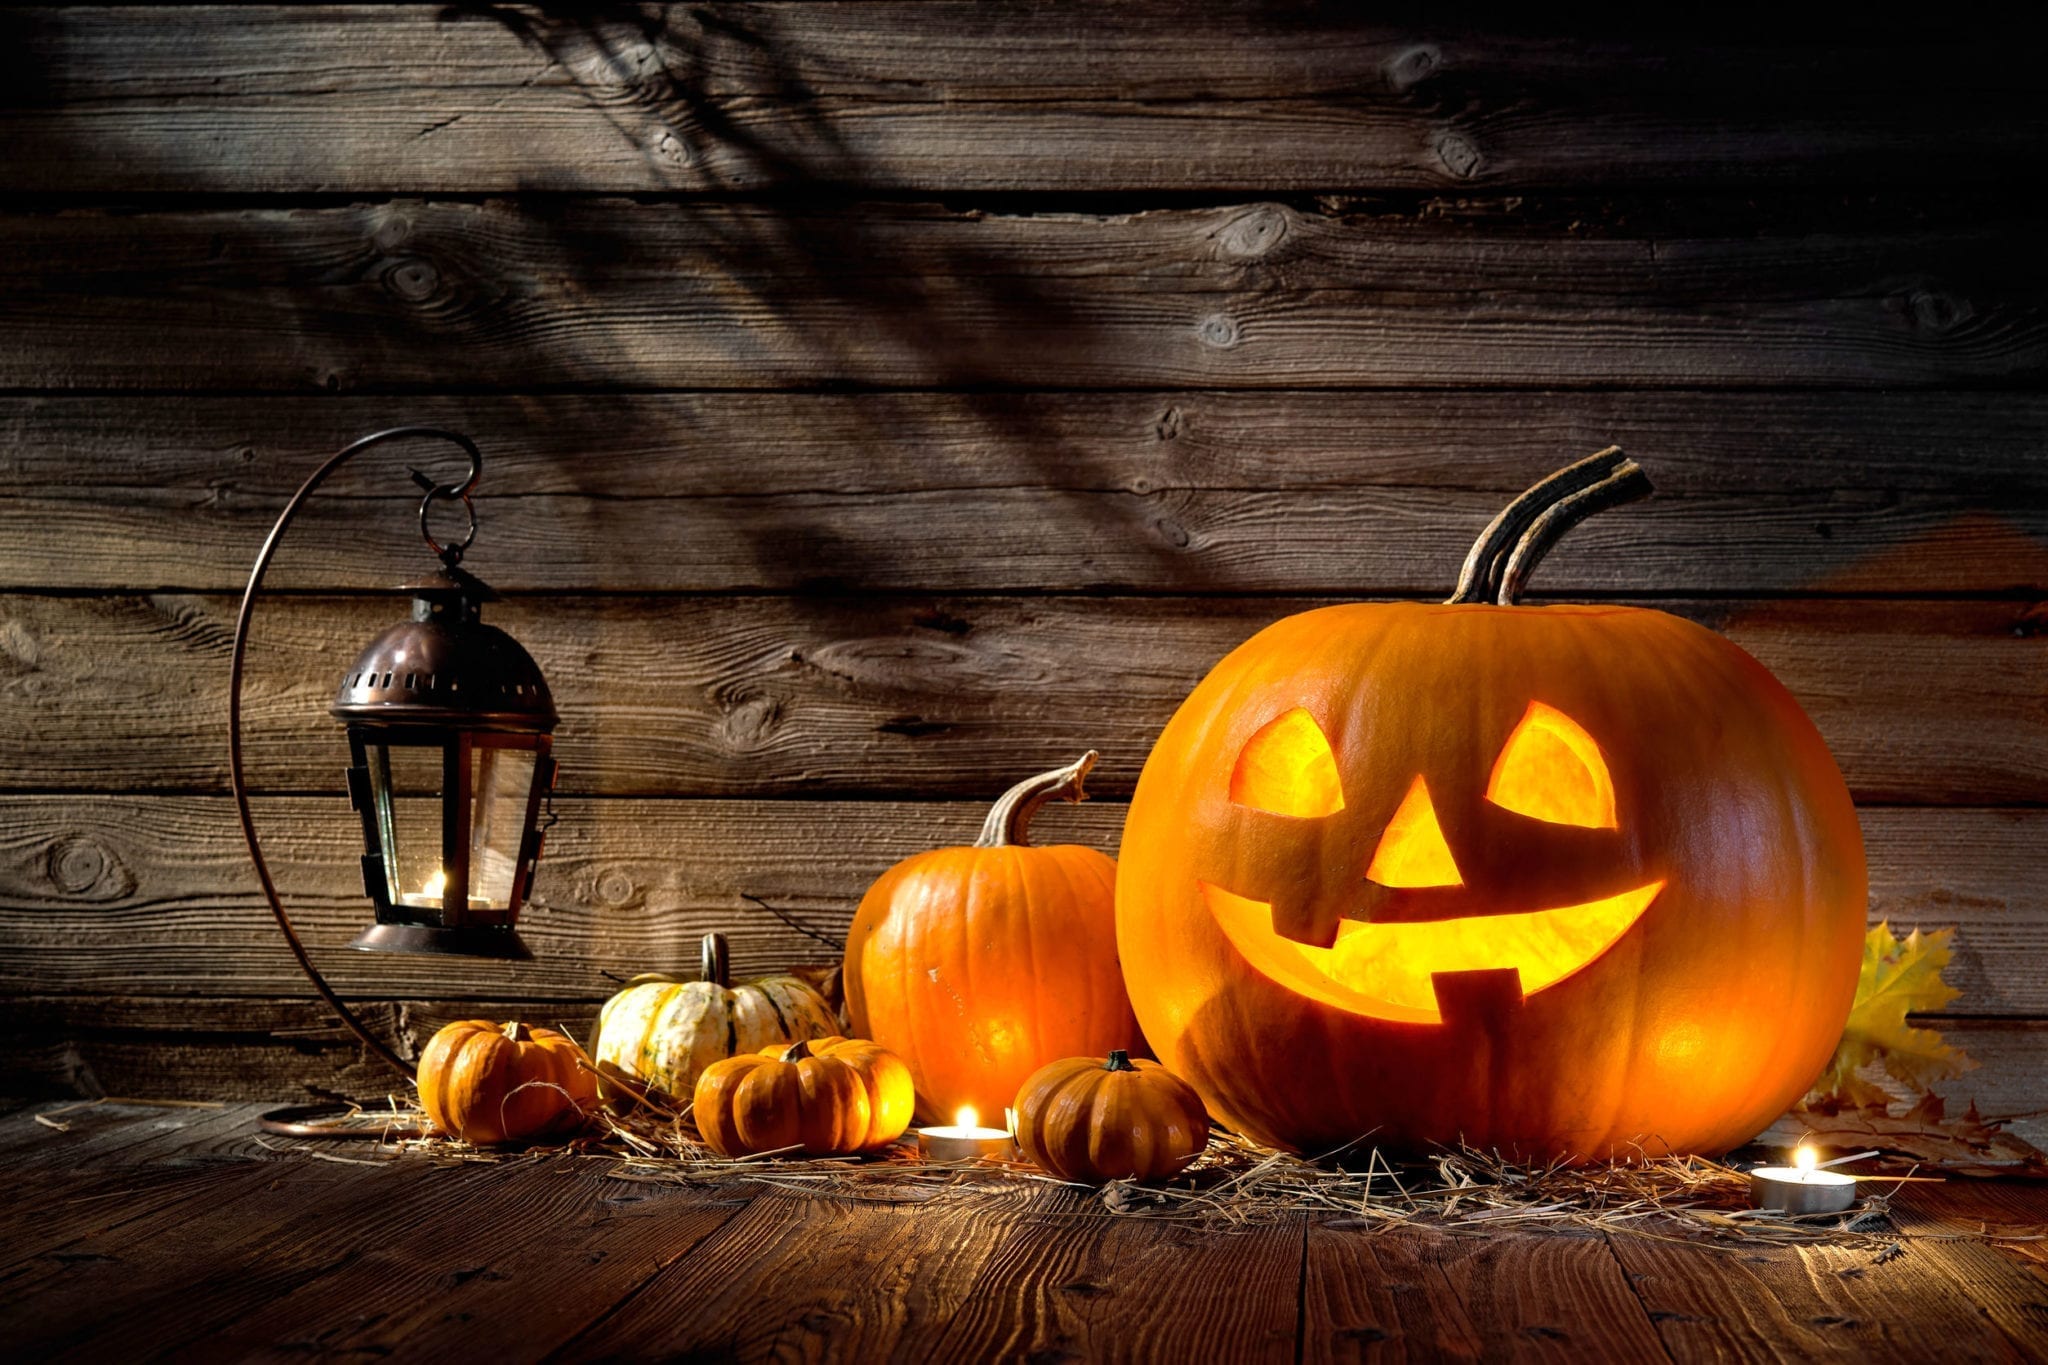 Beyond Razorblades: Why Halloween Is a Scary Holiday for Florida Kids